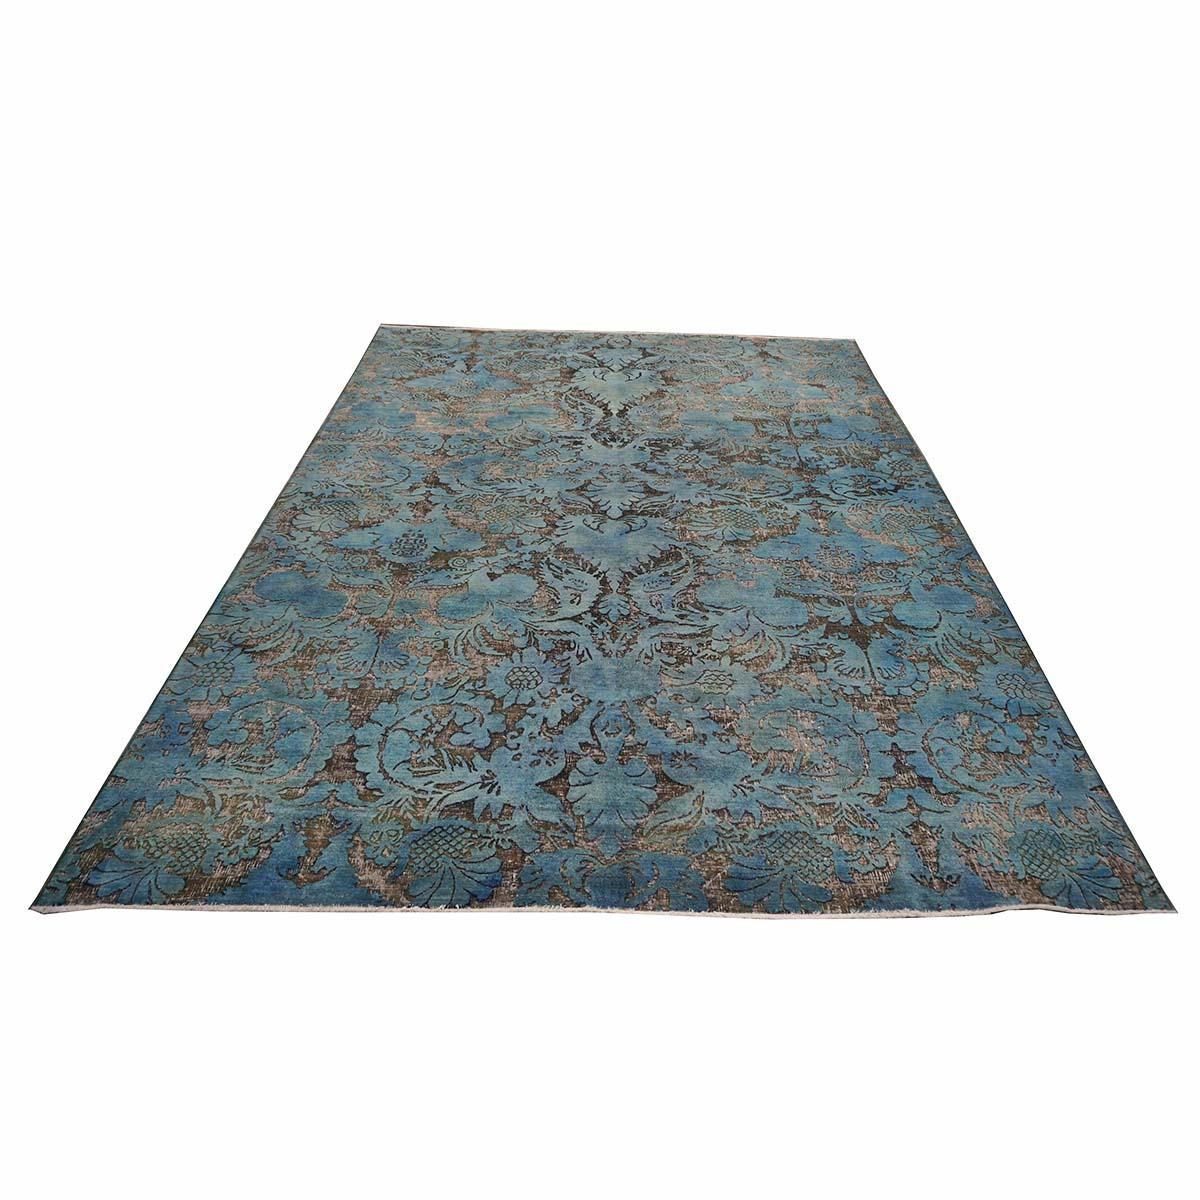 Distressed Modern Afghan 9x12 Teal Blue & White Handmade Area Rug In Excellent Condition For Sale In Houston, TX